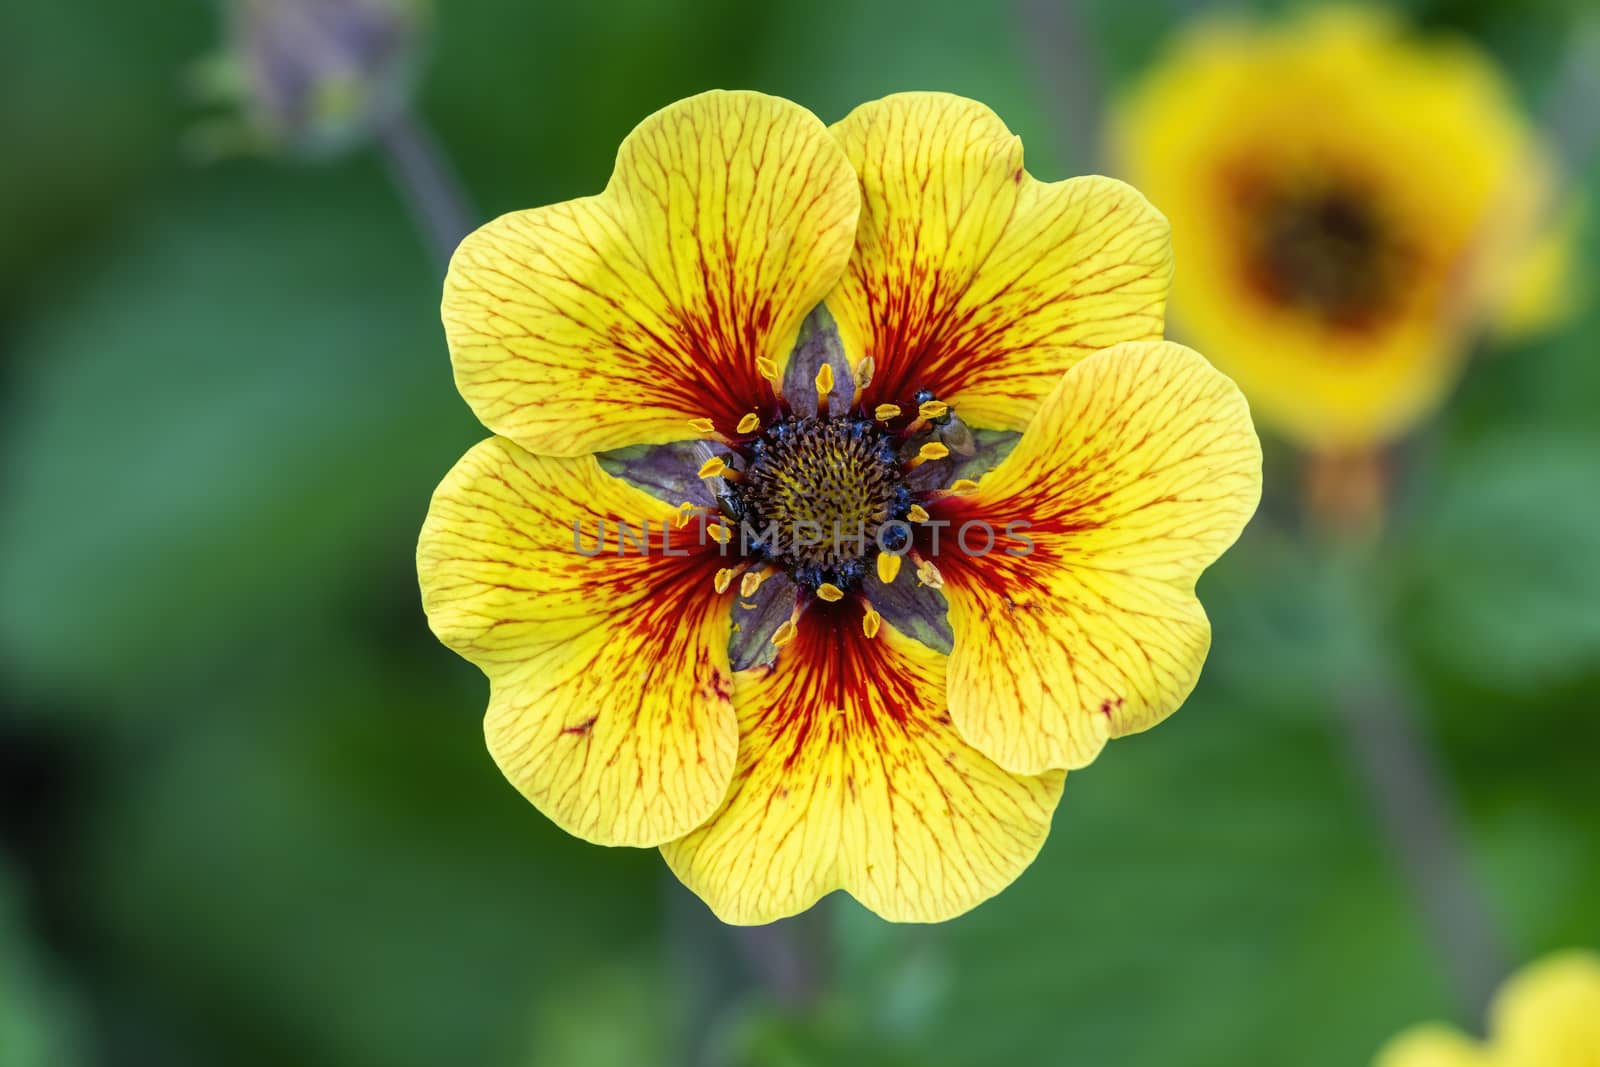 Potentilla 'Esta Ann' a yellow red flowered plant commonly known as cinquefoil